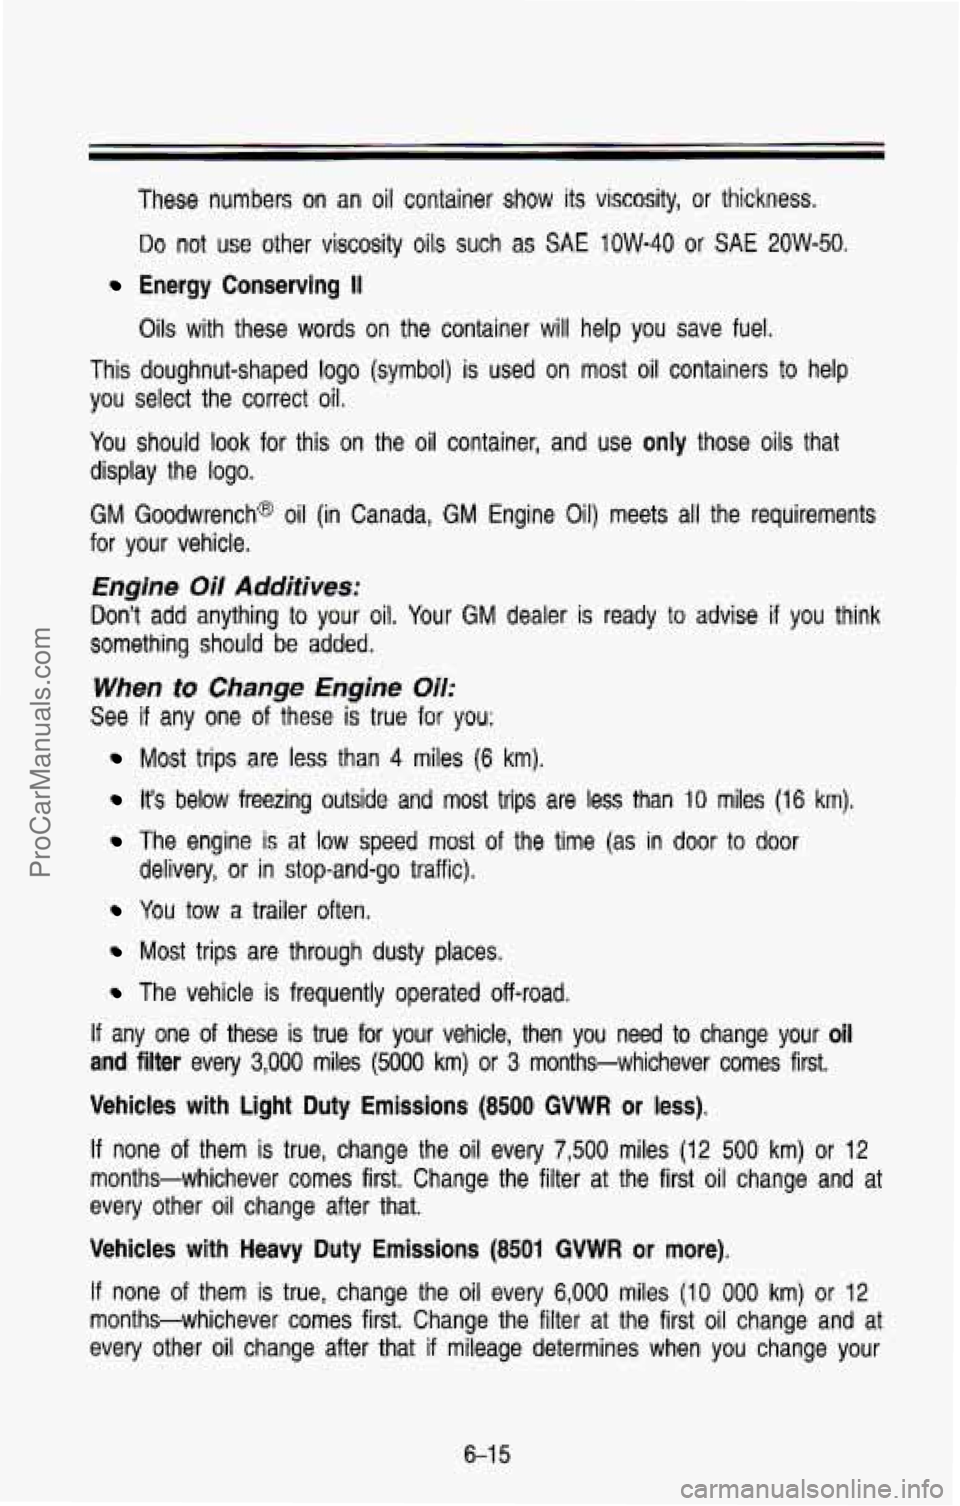 CHEVROLET SUBURBAN 1993  Owners Manual These  numbers  on  an oil container show its  viscosity,  or thickness. 
Do not  use  other  viscosity  oils  such as SAE 1OW-40 or SAE 2OW-50. 
Energy  Conserving II 
Oils with  these  words  on  th